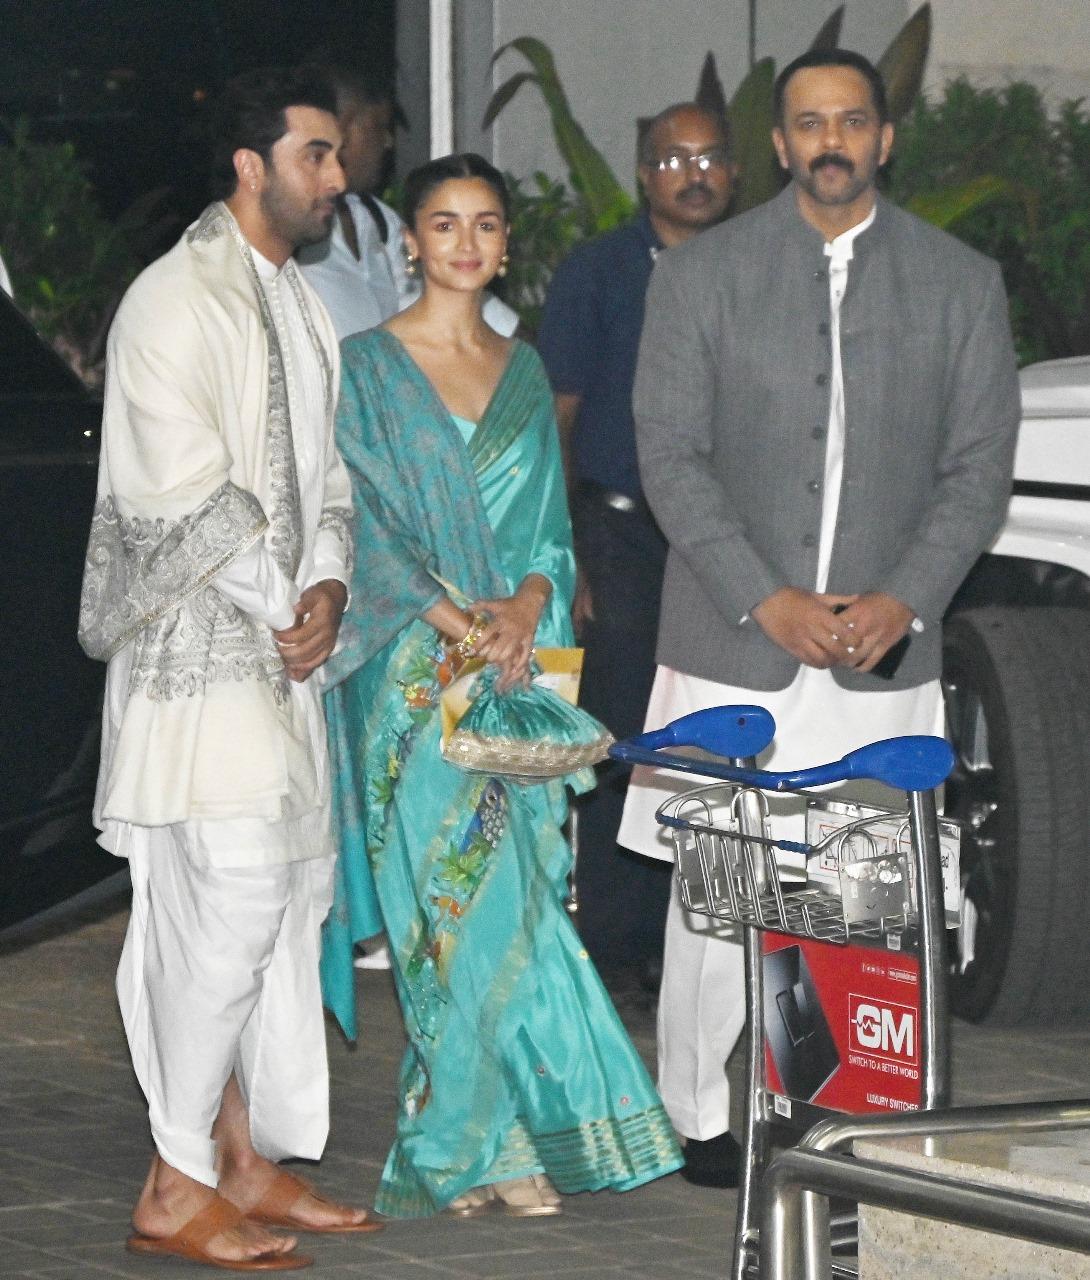 Actress Alia Bhatt was spotted leaving for the 'Pran Pratishtha' ceremony of Ayodhya's Ram temple on Monday with husband Ranbir Kapoor and filmmaker Rohit Shetty.